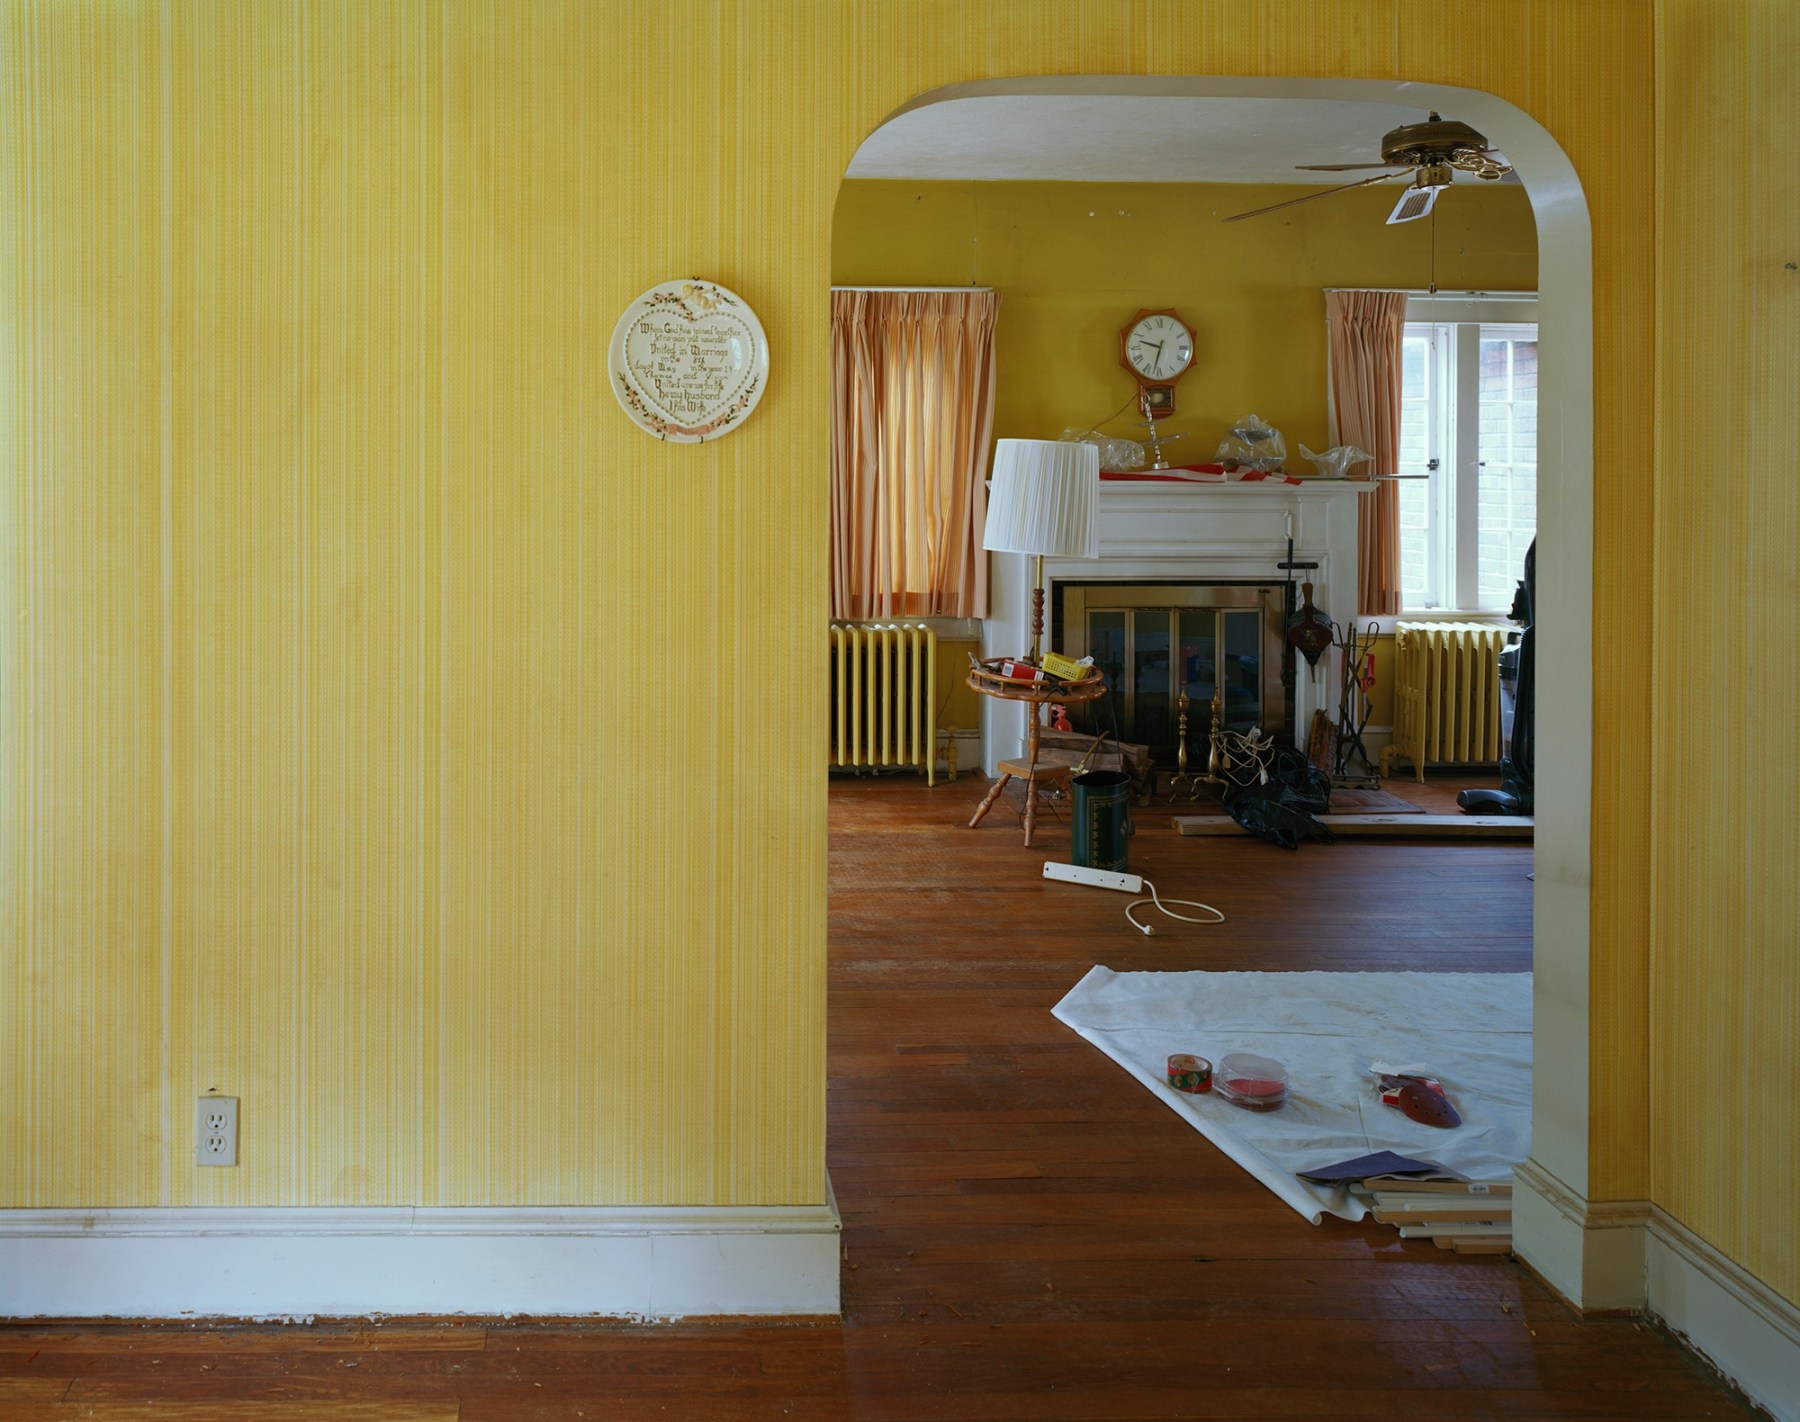 Photograph of interior of house with yellow walls